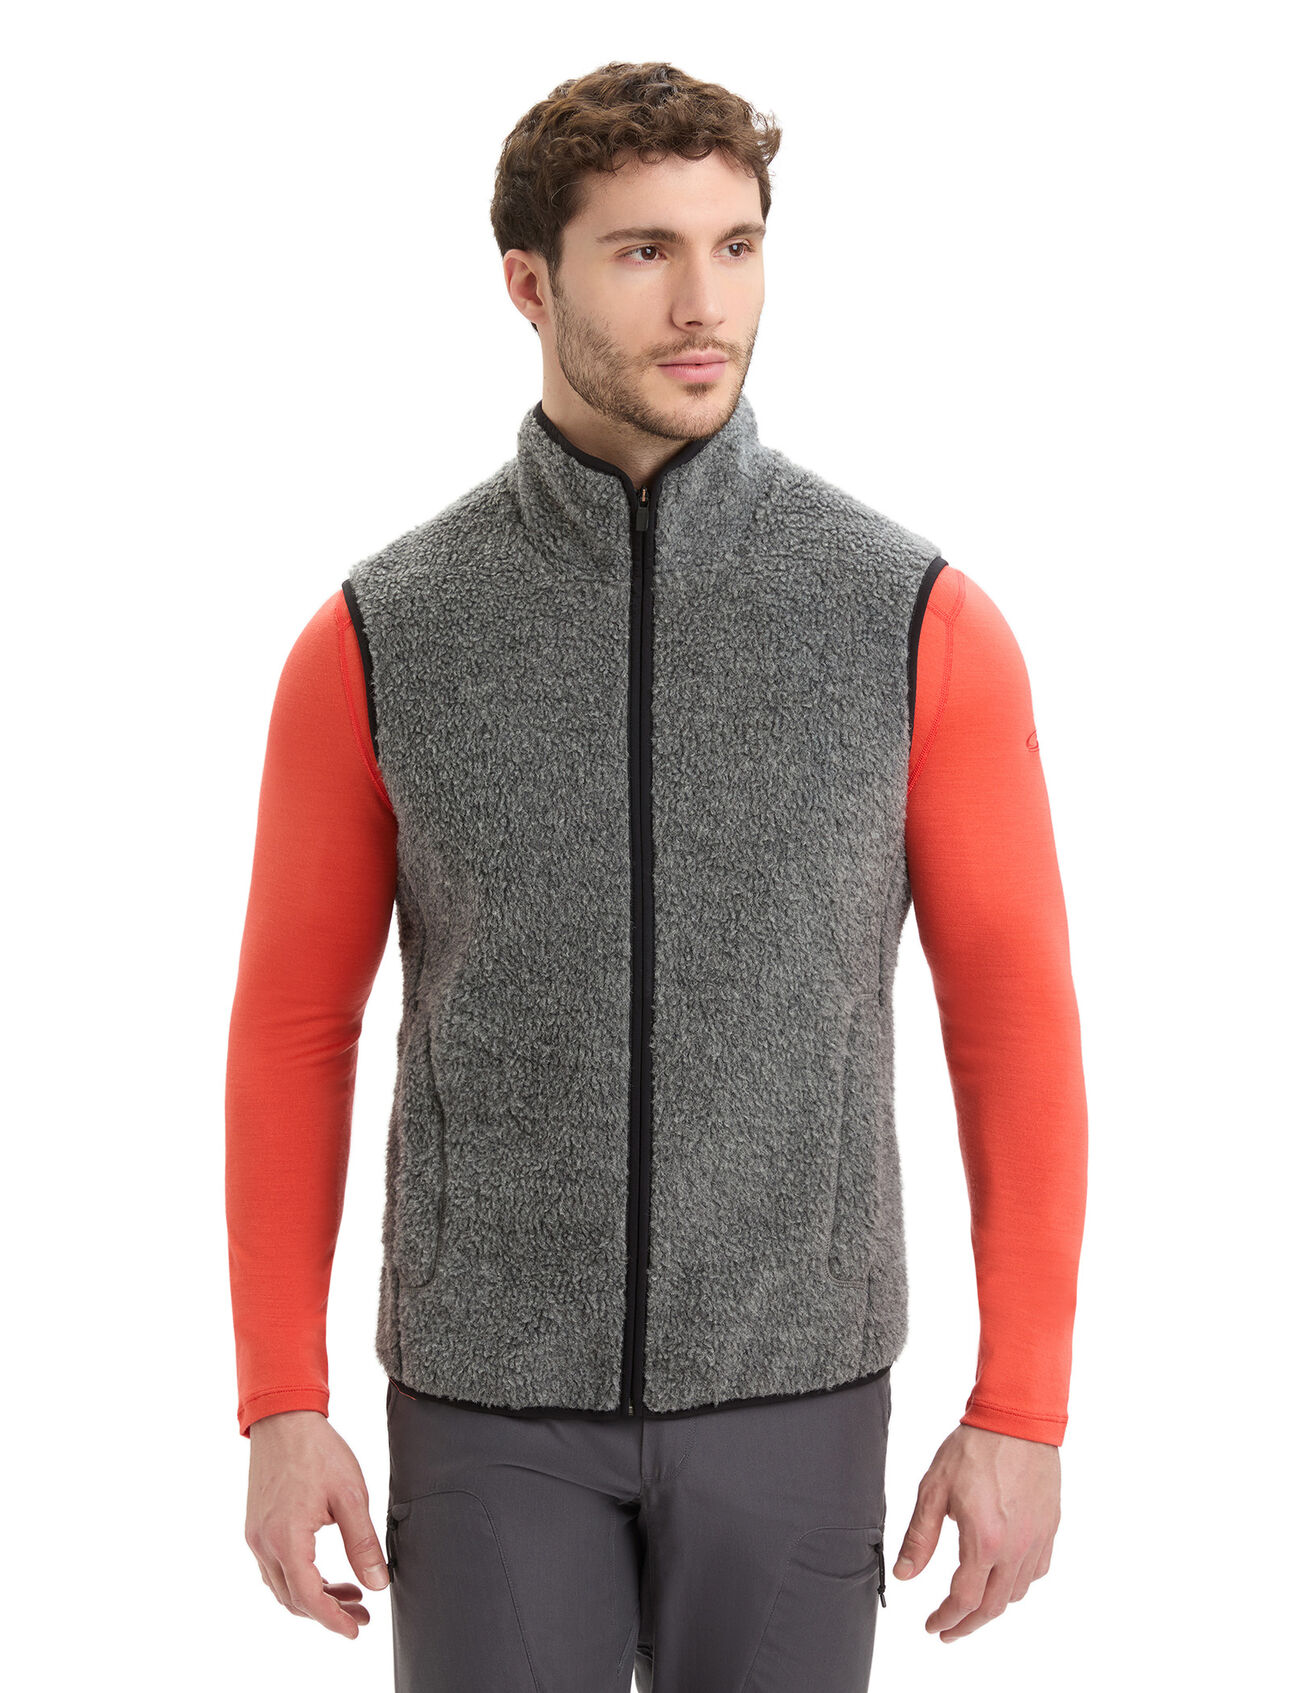 Mens RealFleece™ Merino High Pile Vest A regular-fit merino fleece vest designed for year-round warmth and comfort, the RealFleece™ High Pile Vest adds the perfect dose of core insulation for any active pursuit.